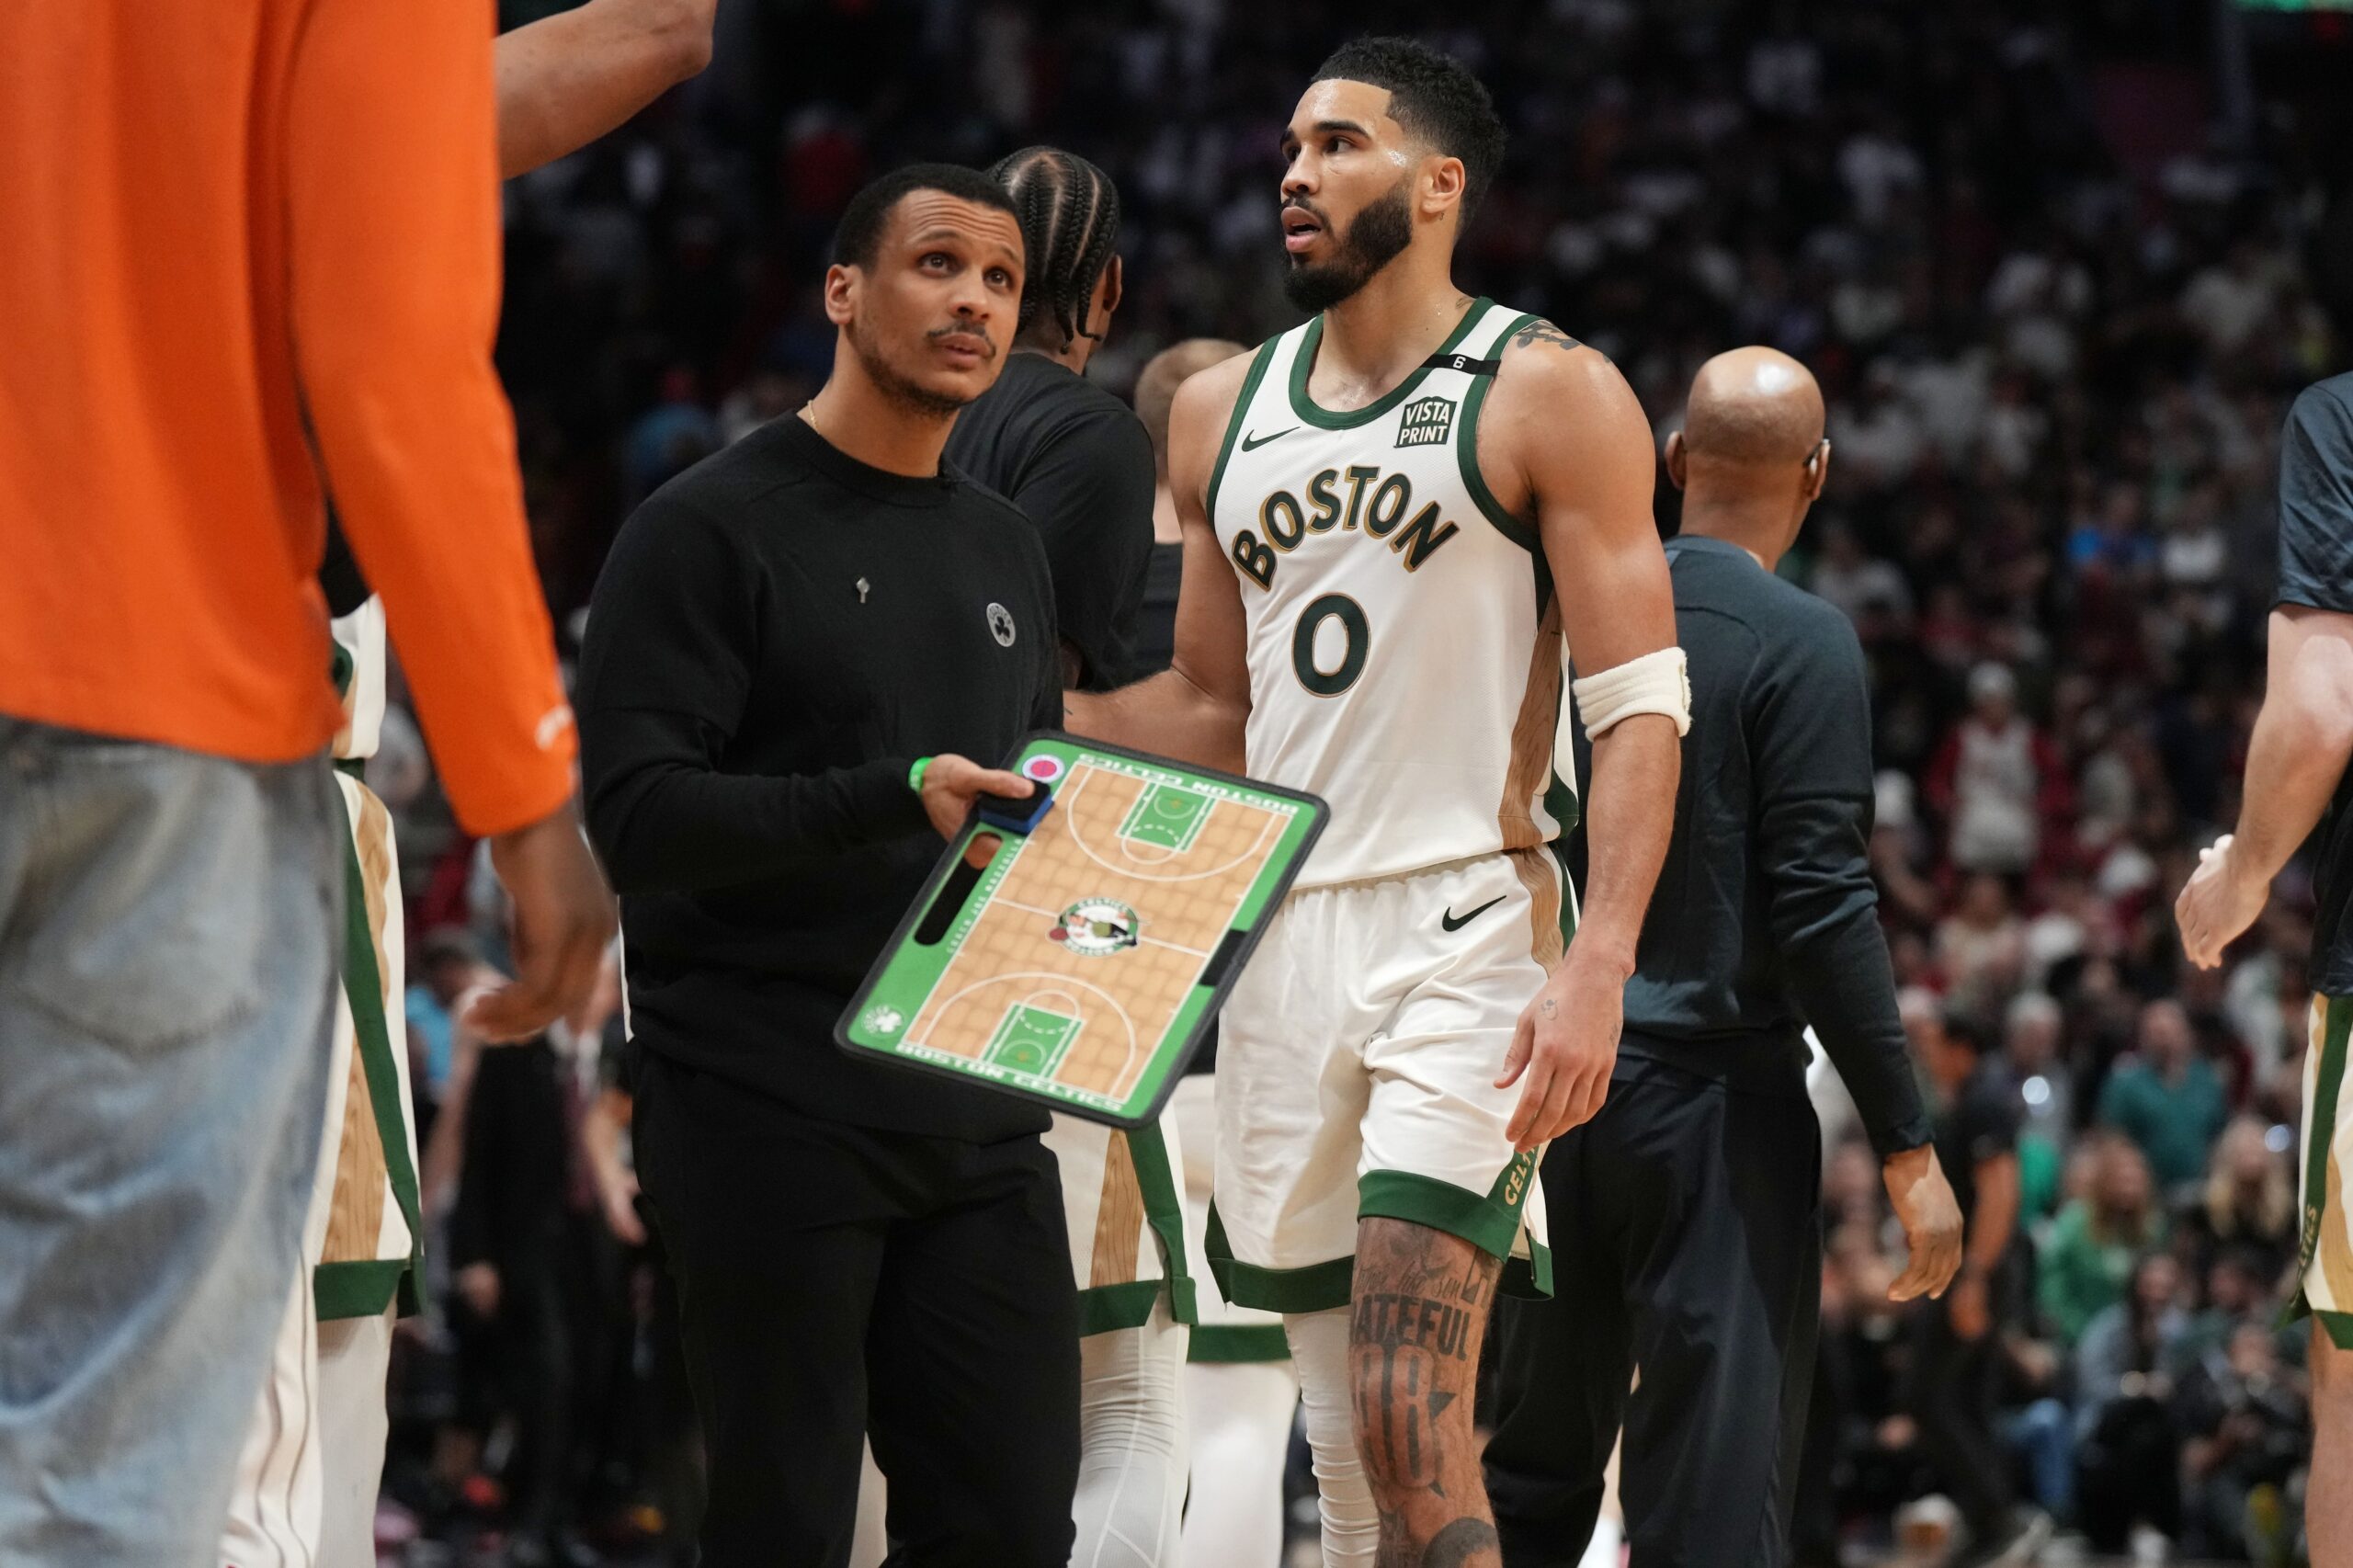 Jayson Tatum and Joe Mazzulla led the Boston Celtics to the best record in the East.